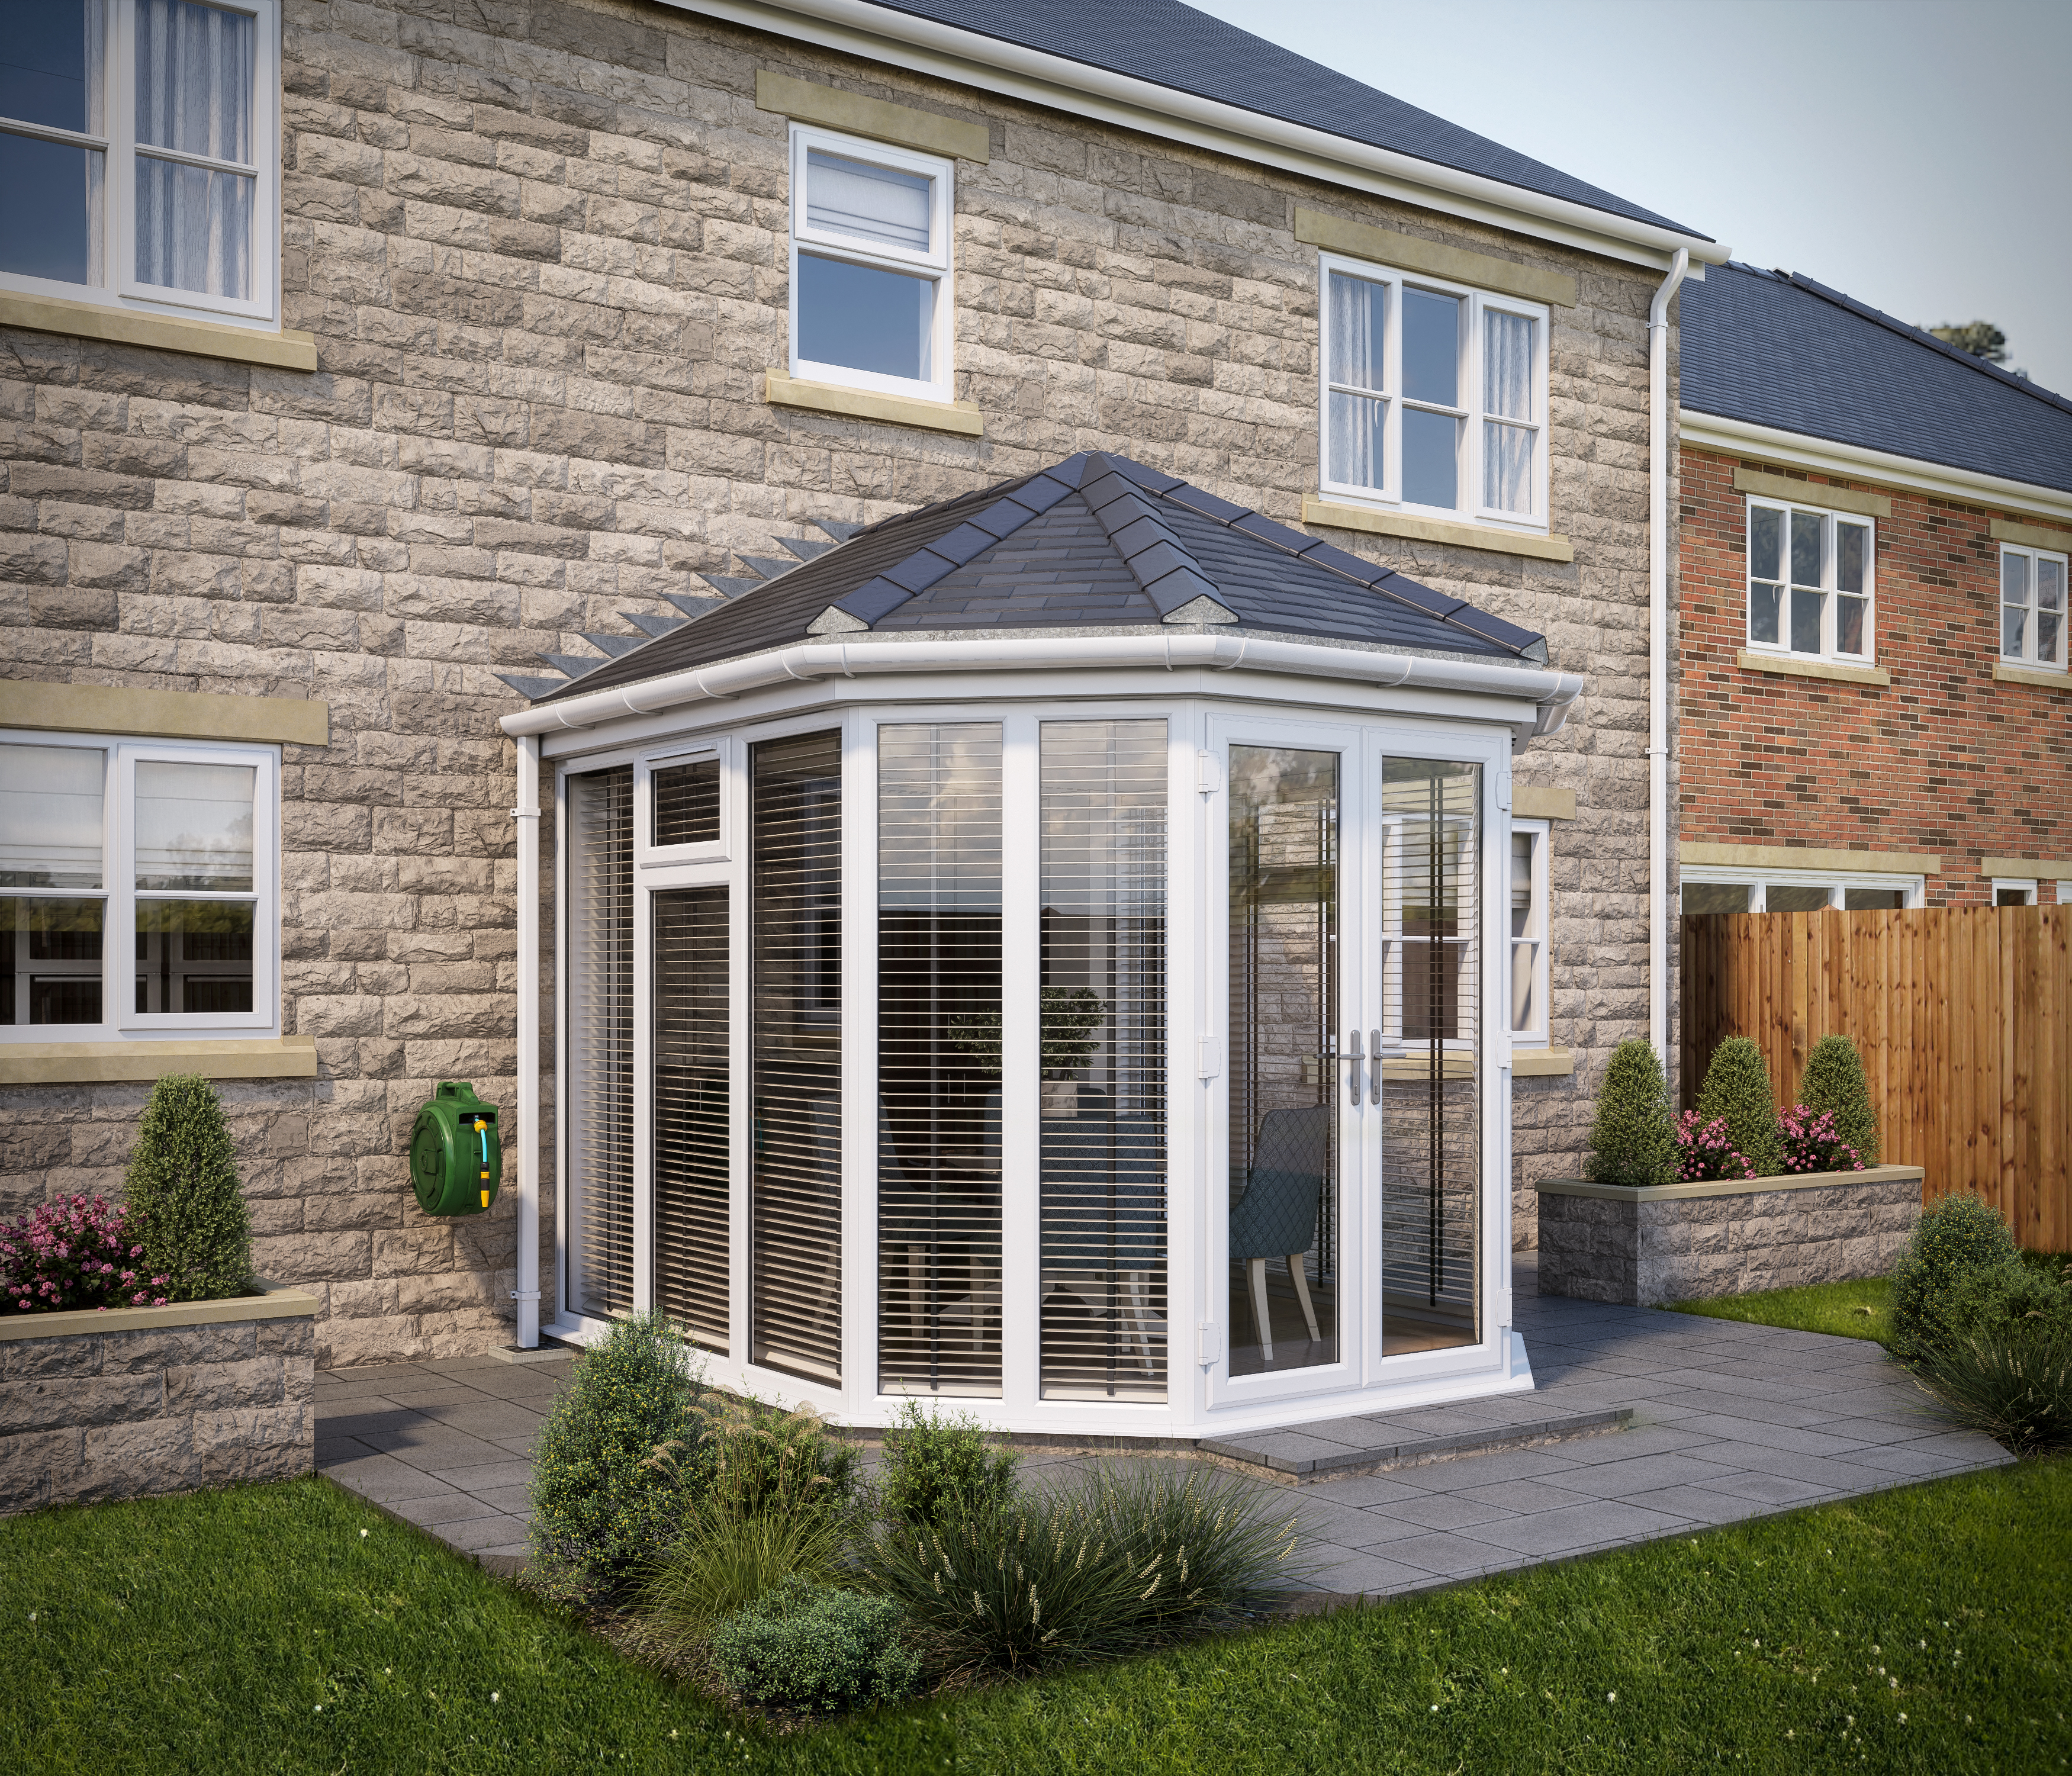 SOLid roof Full Height Victorian Conservatory White Frames with Titanium Grey Tiles